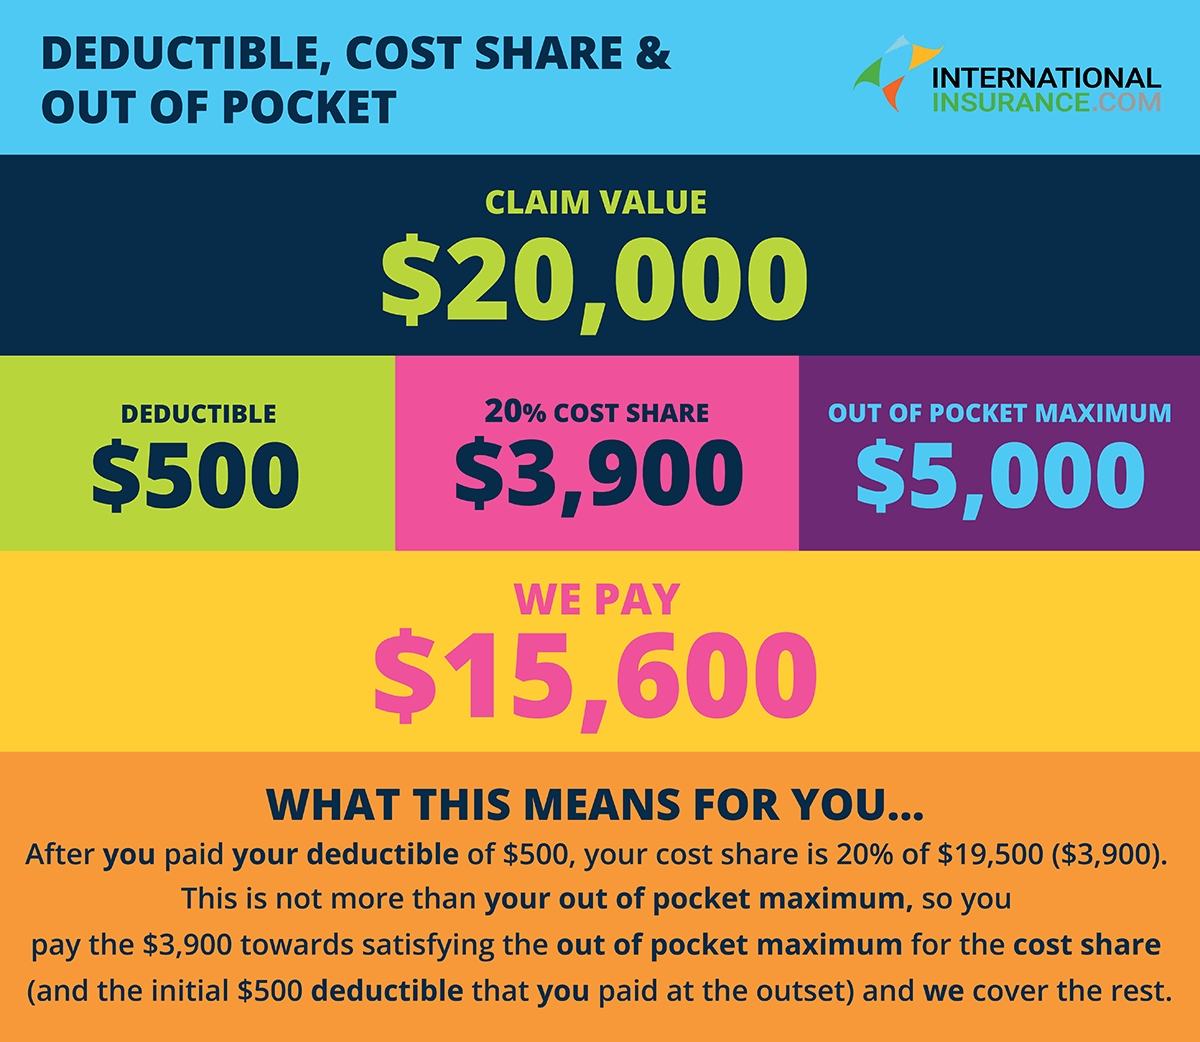 Calendar Year Deductible And Out Of Pocket Maximum | Month ...